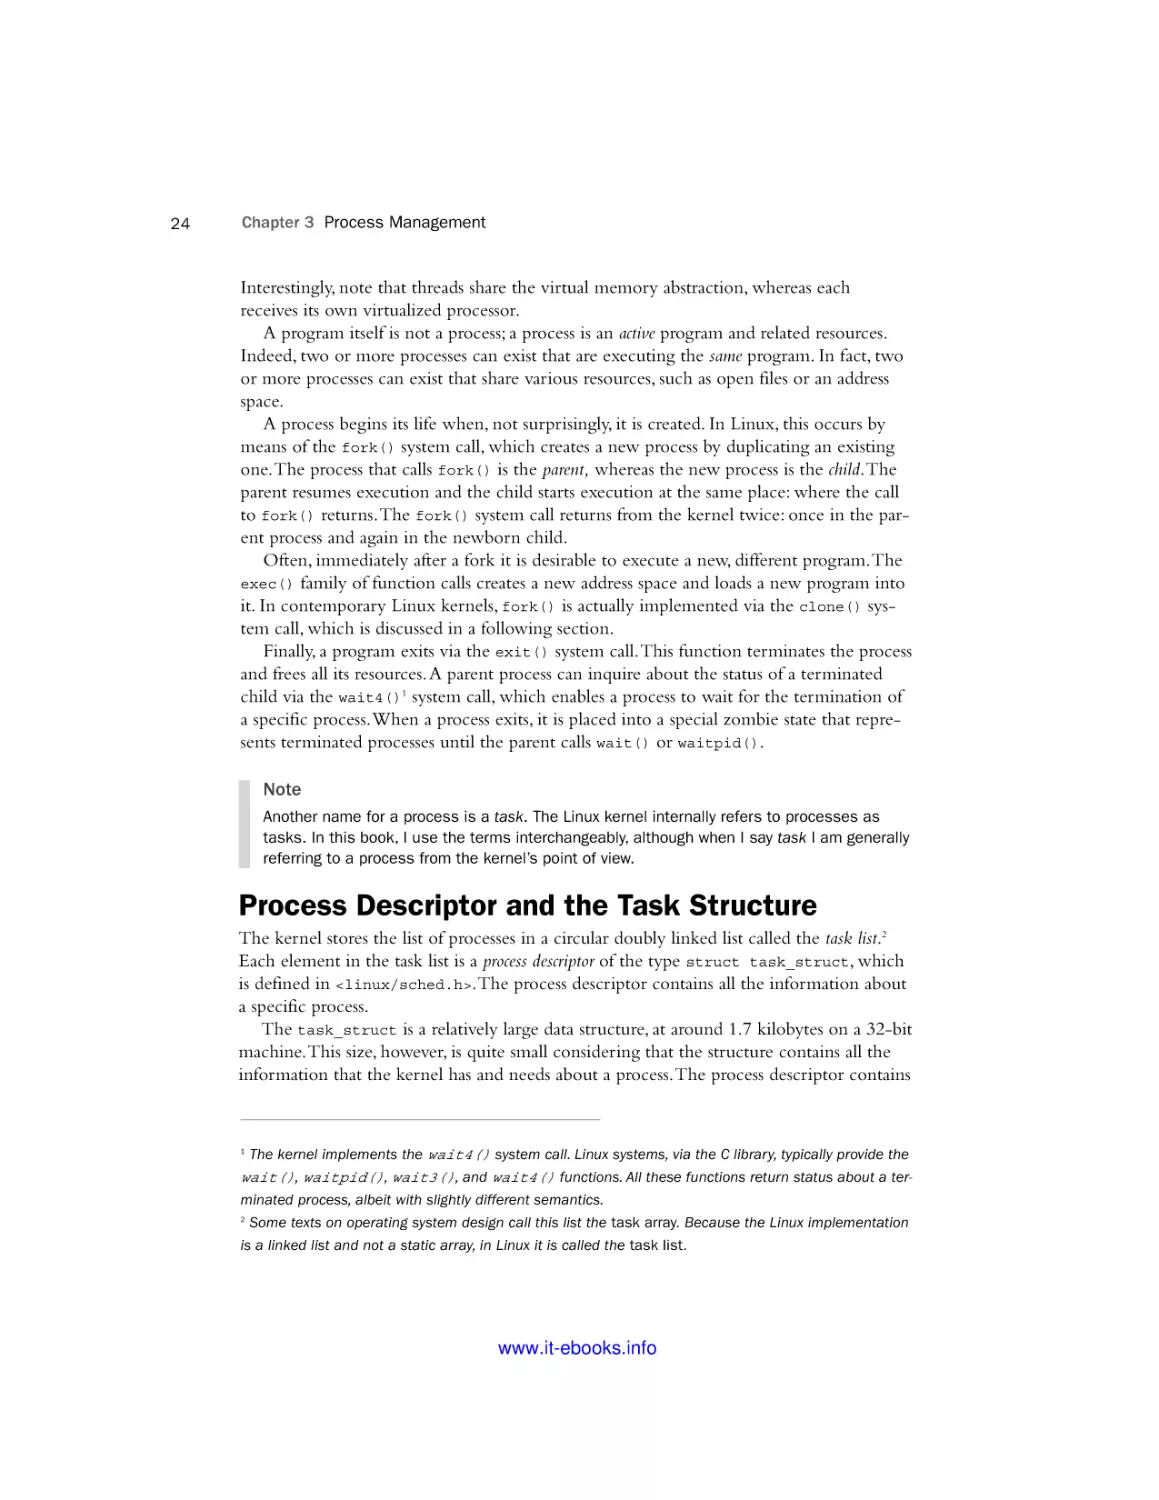 Process Descriptor and the Task Structure